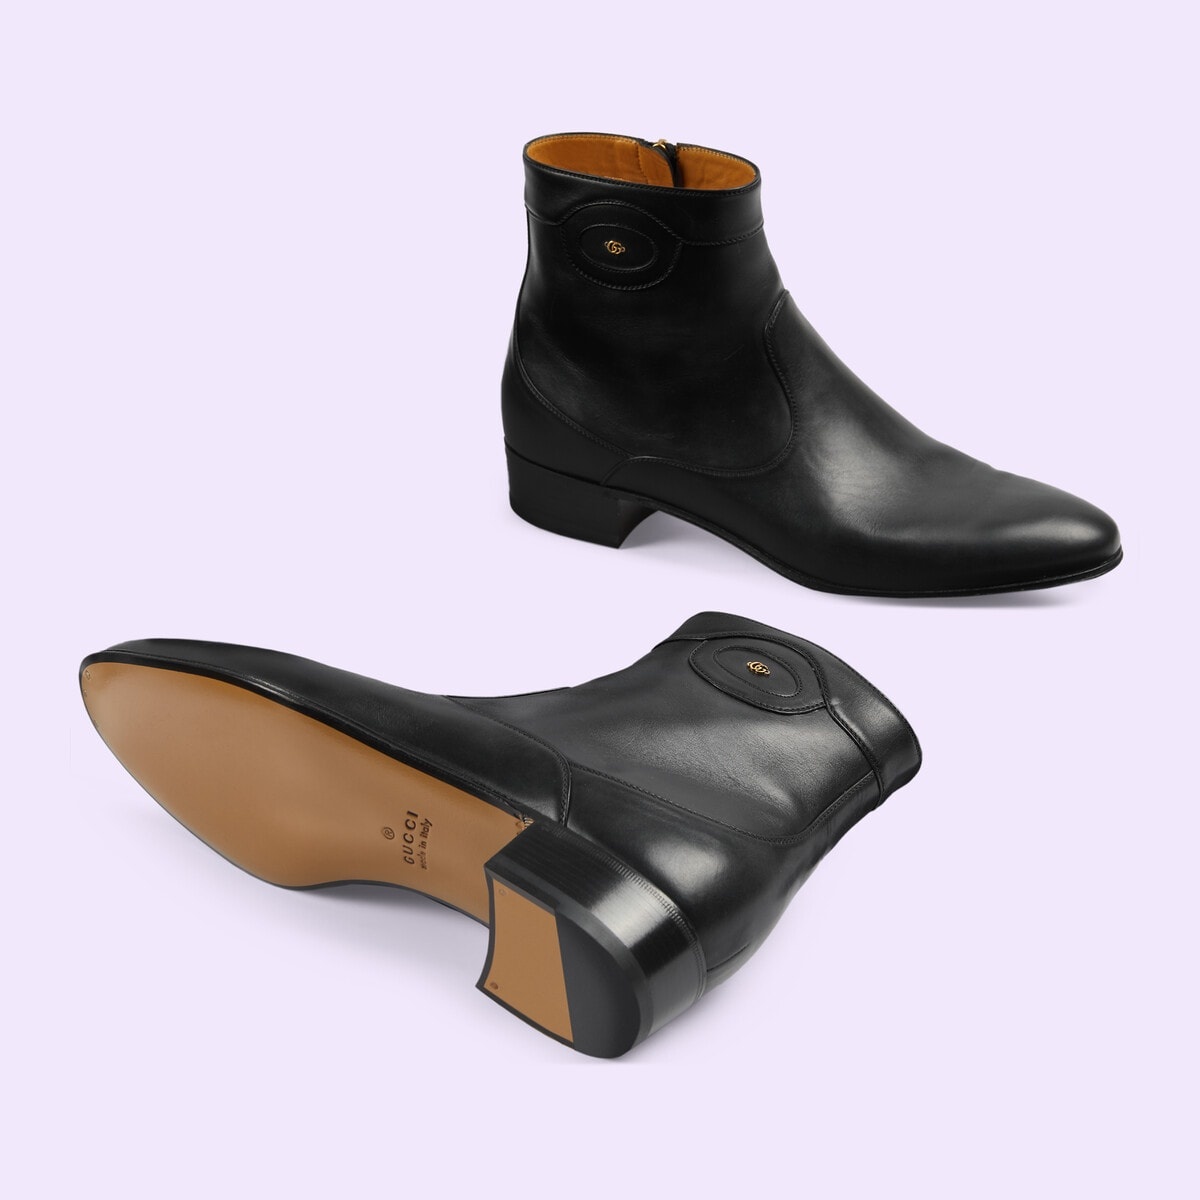 Men's ankle boot with Double G - 6